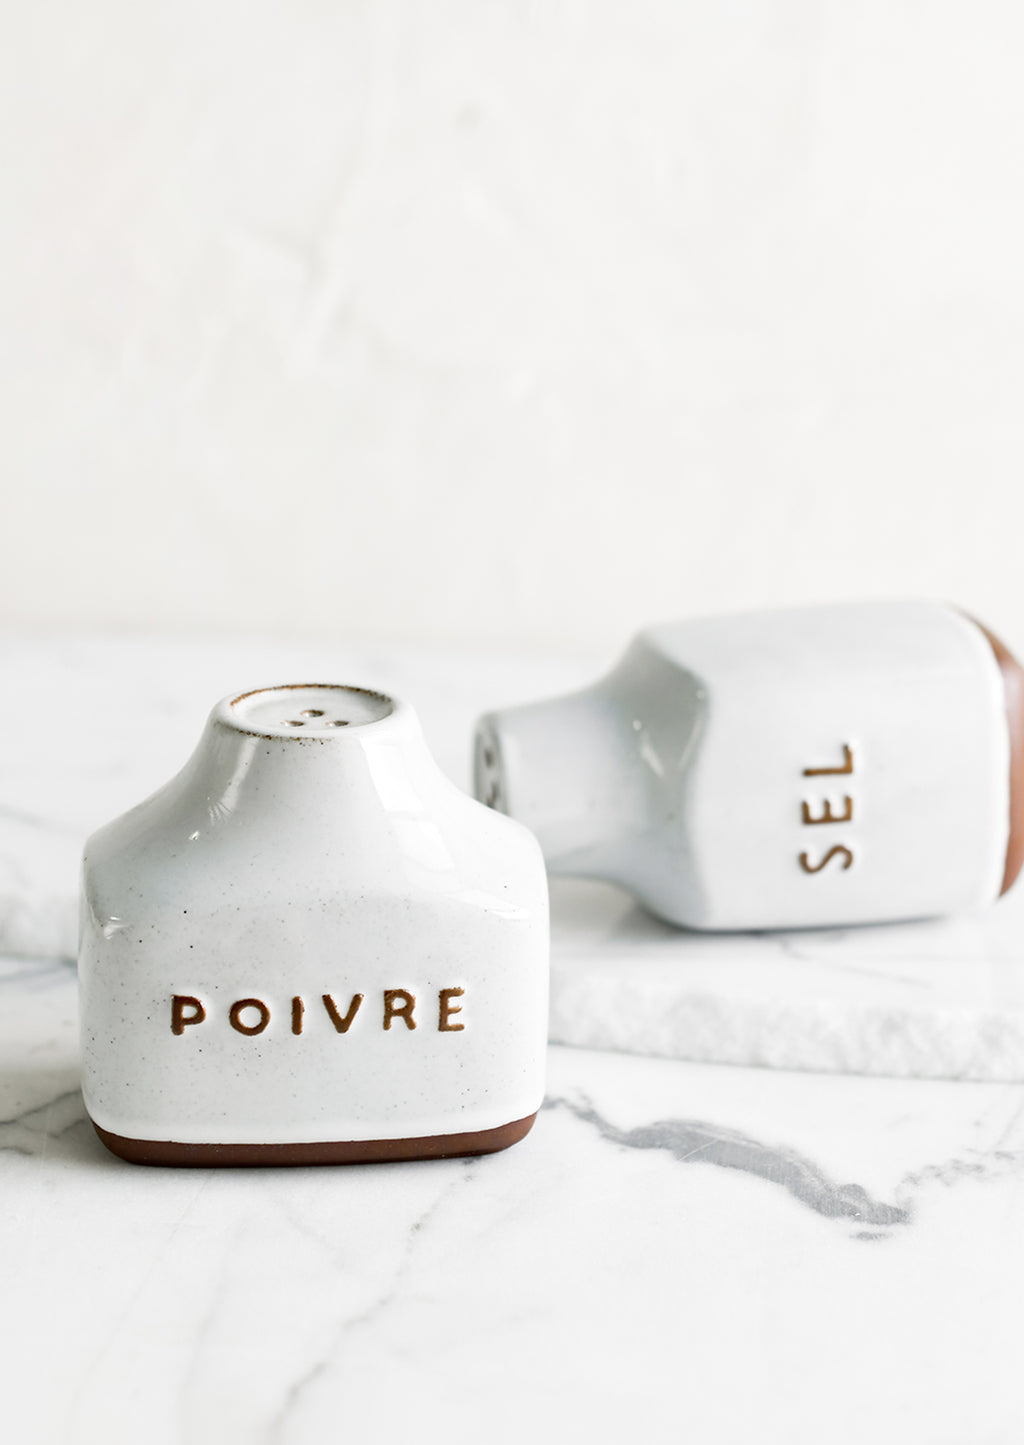 2: Ceramic salt and pepper shakers with text detail in French.